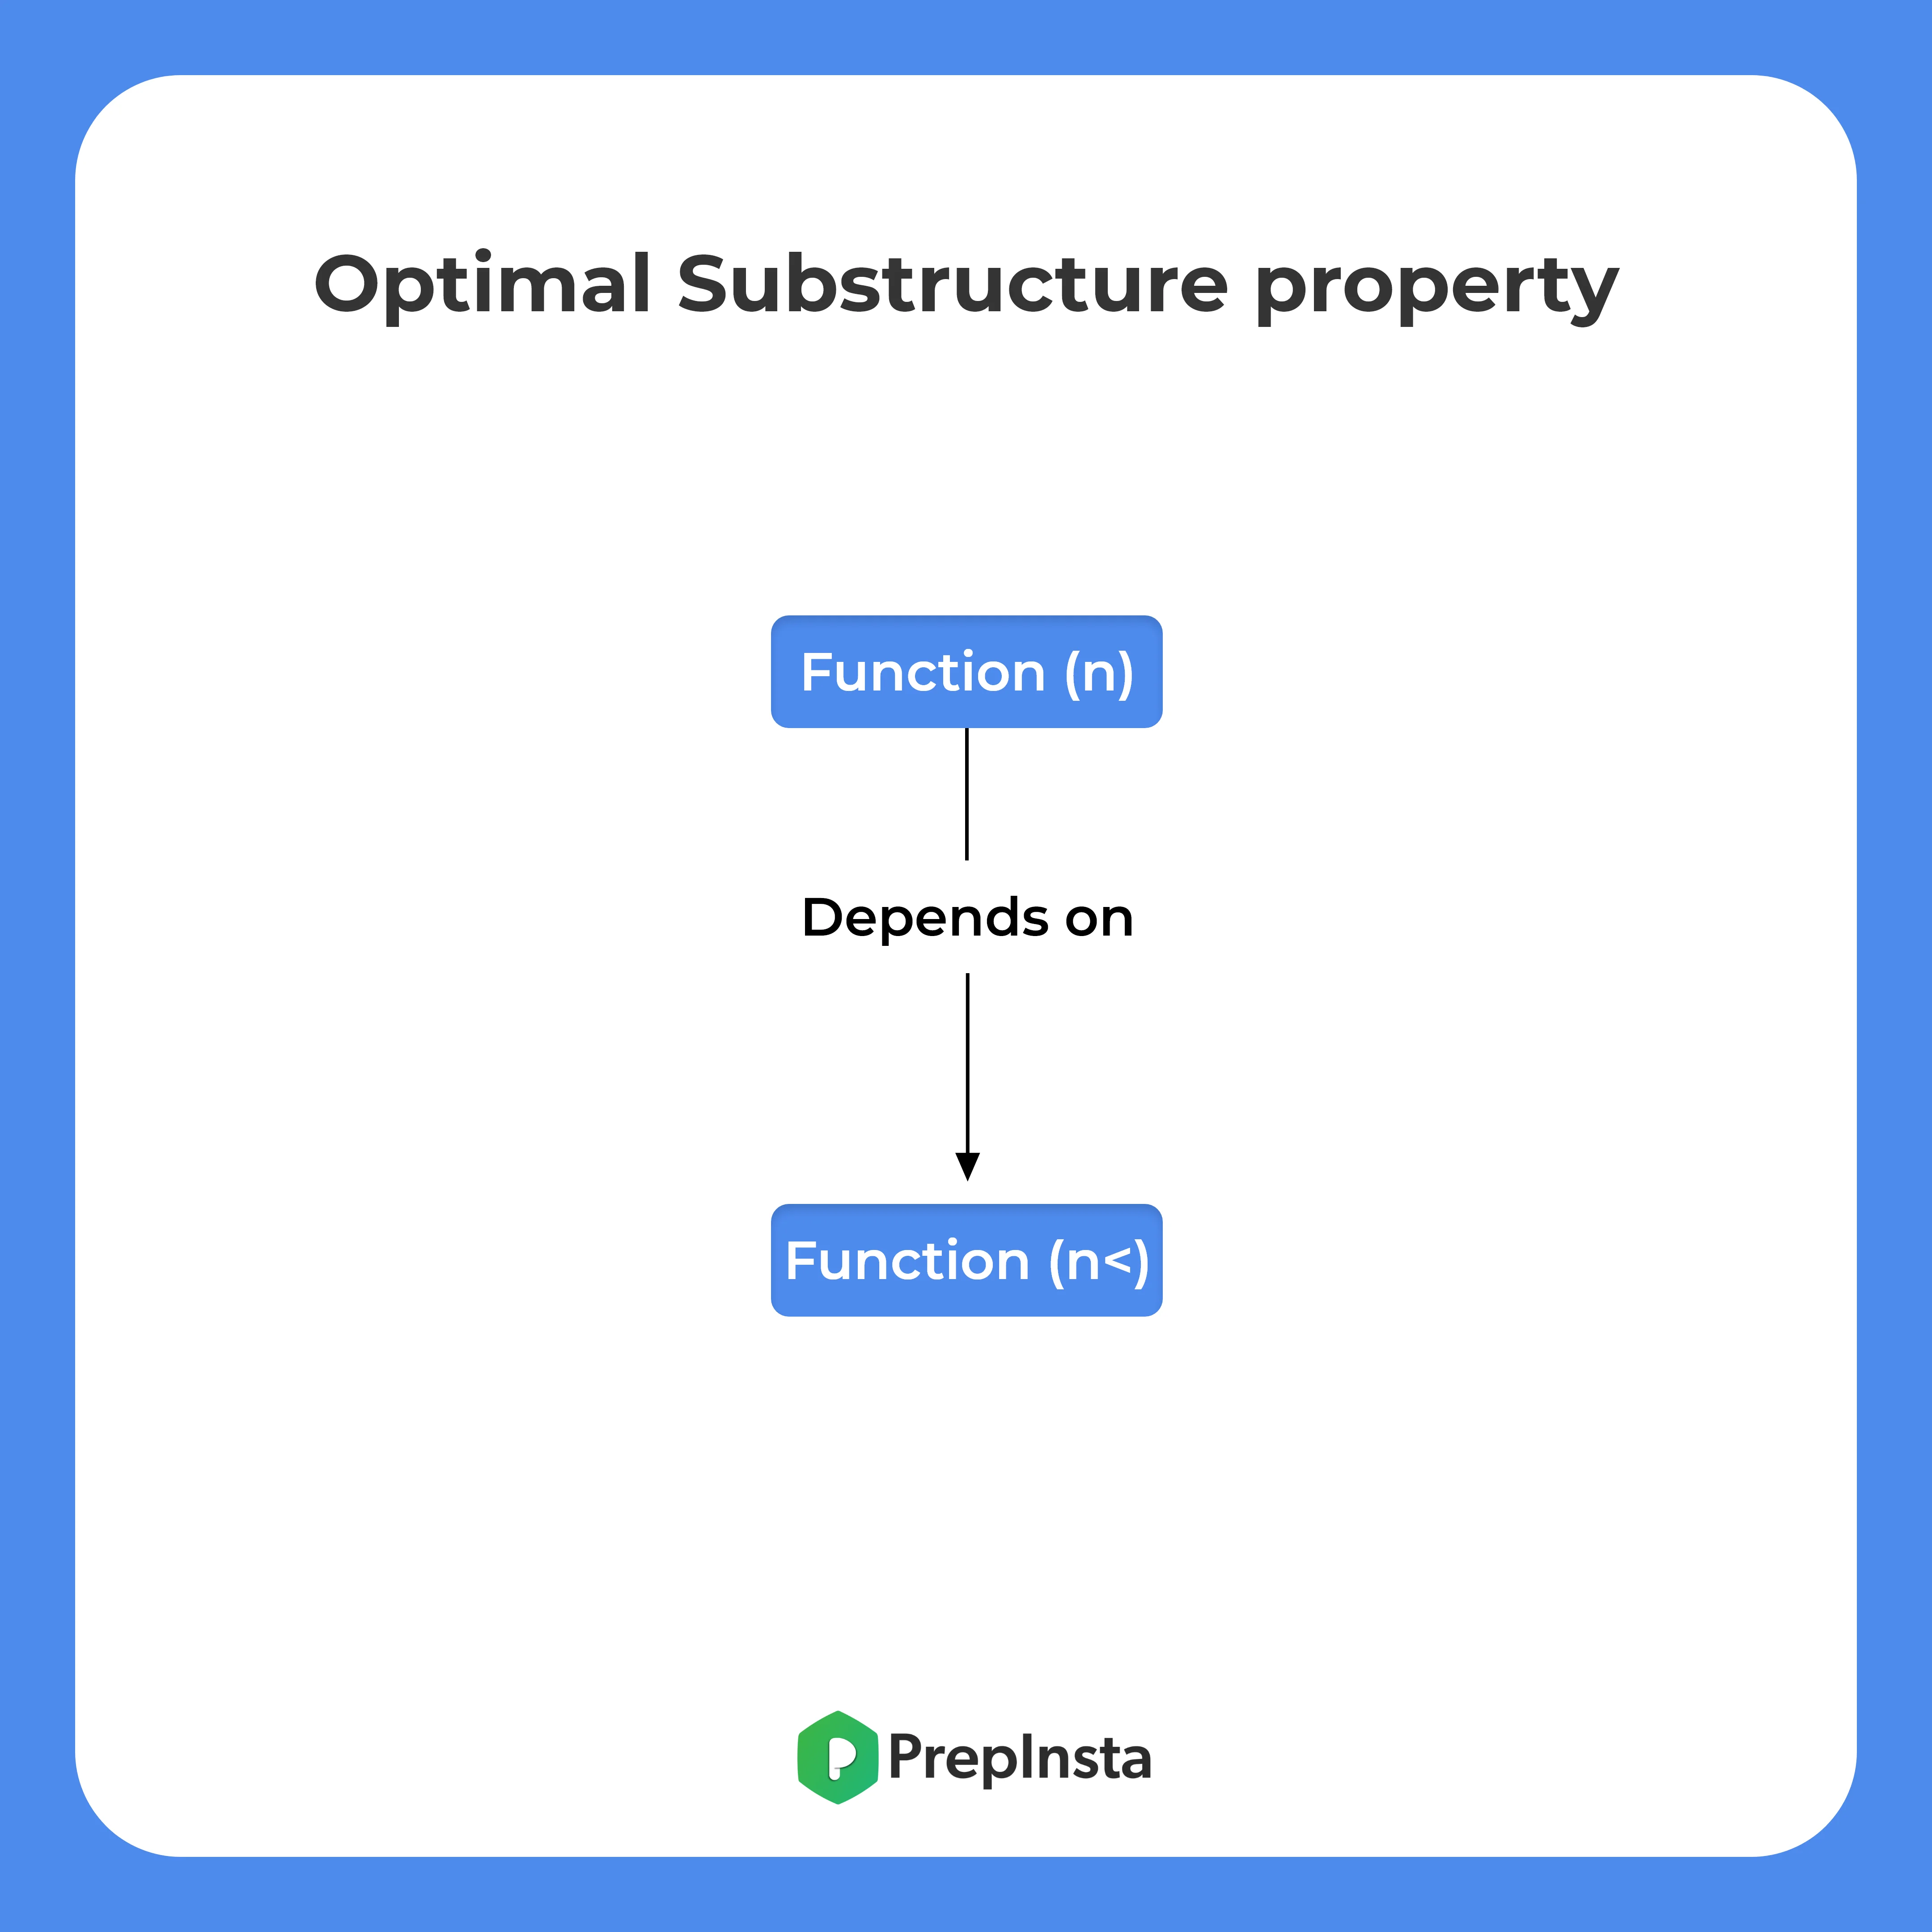 Optimal Substructure Property